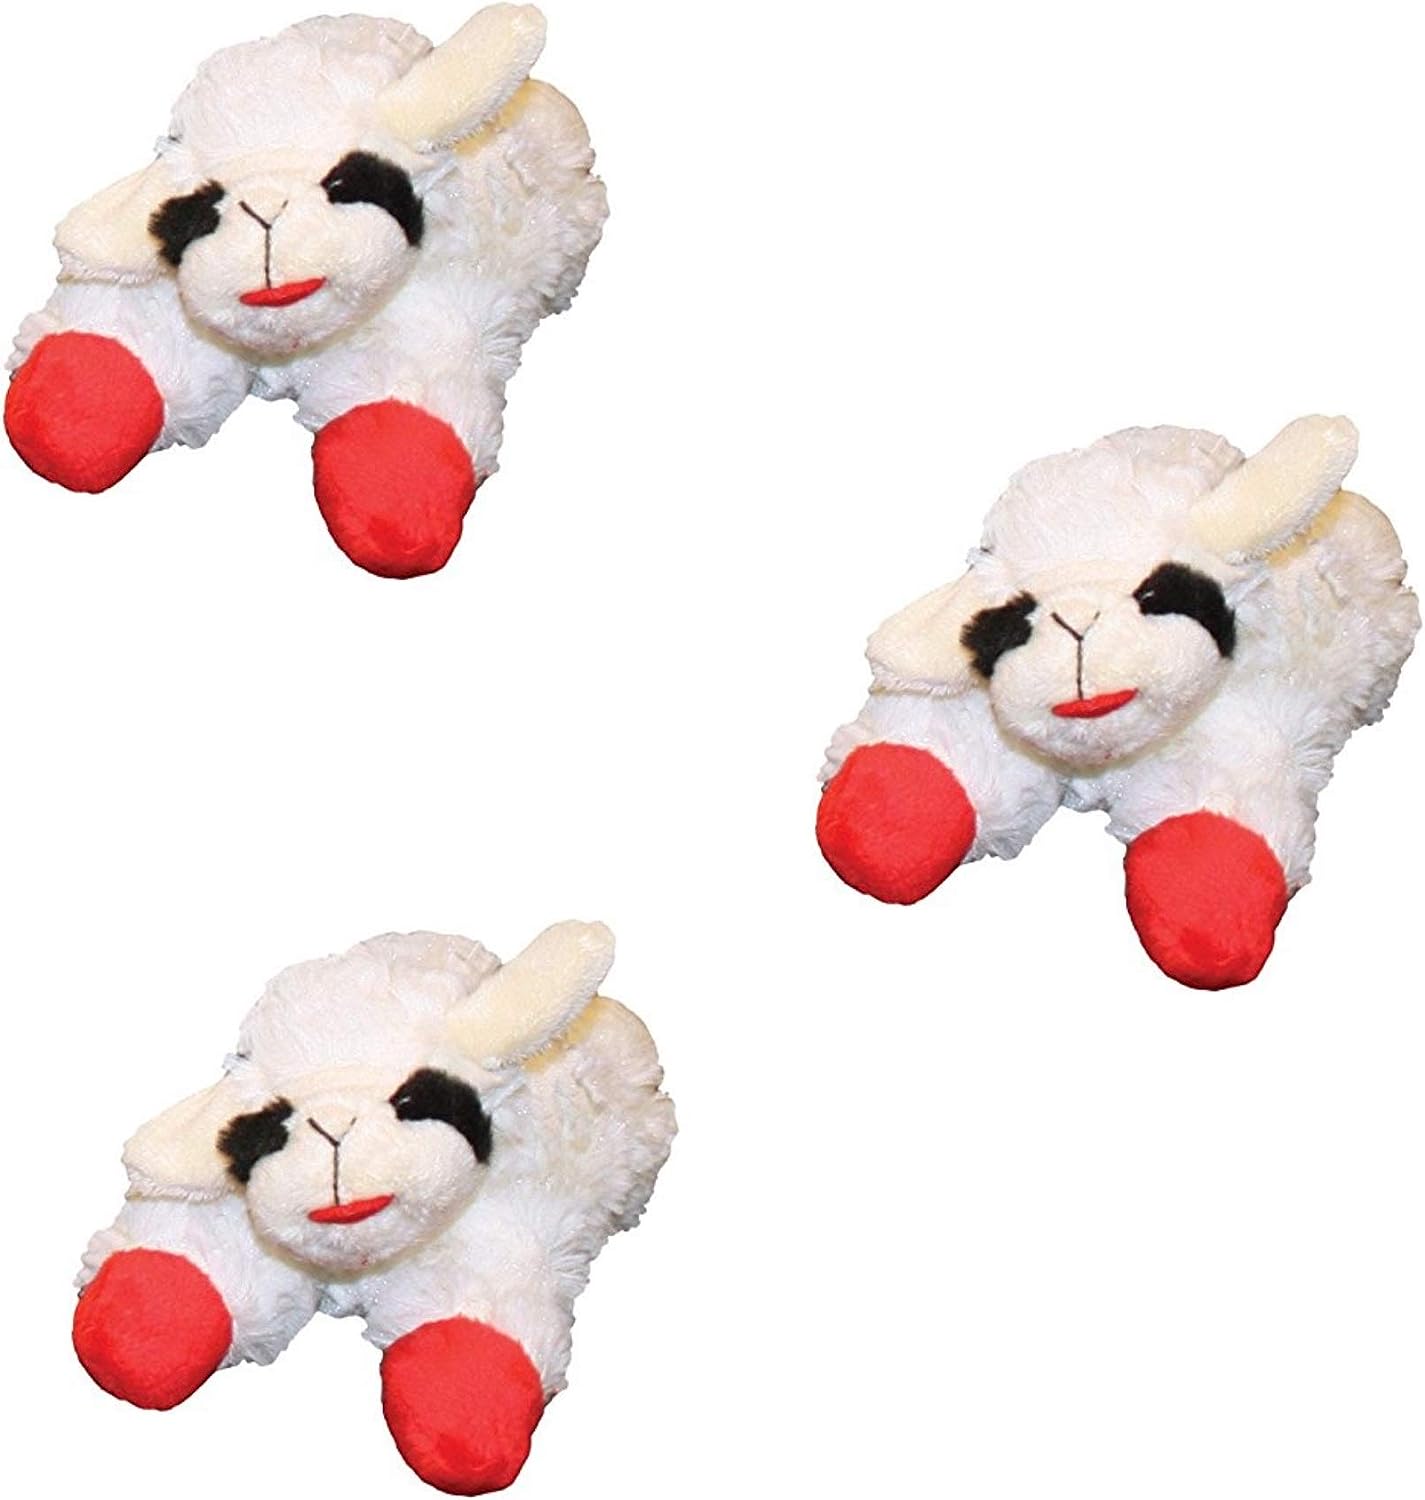 Lambchop Dog Squeaky Toy 3 Pack